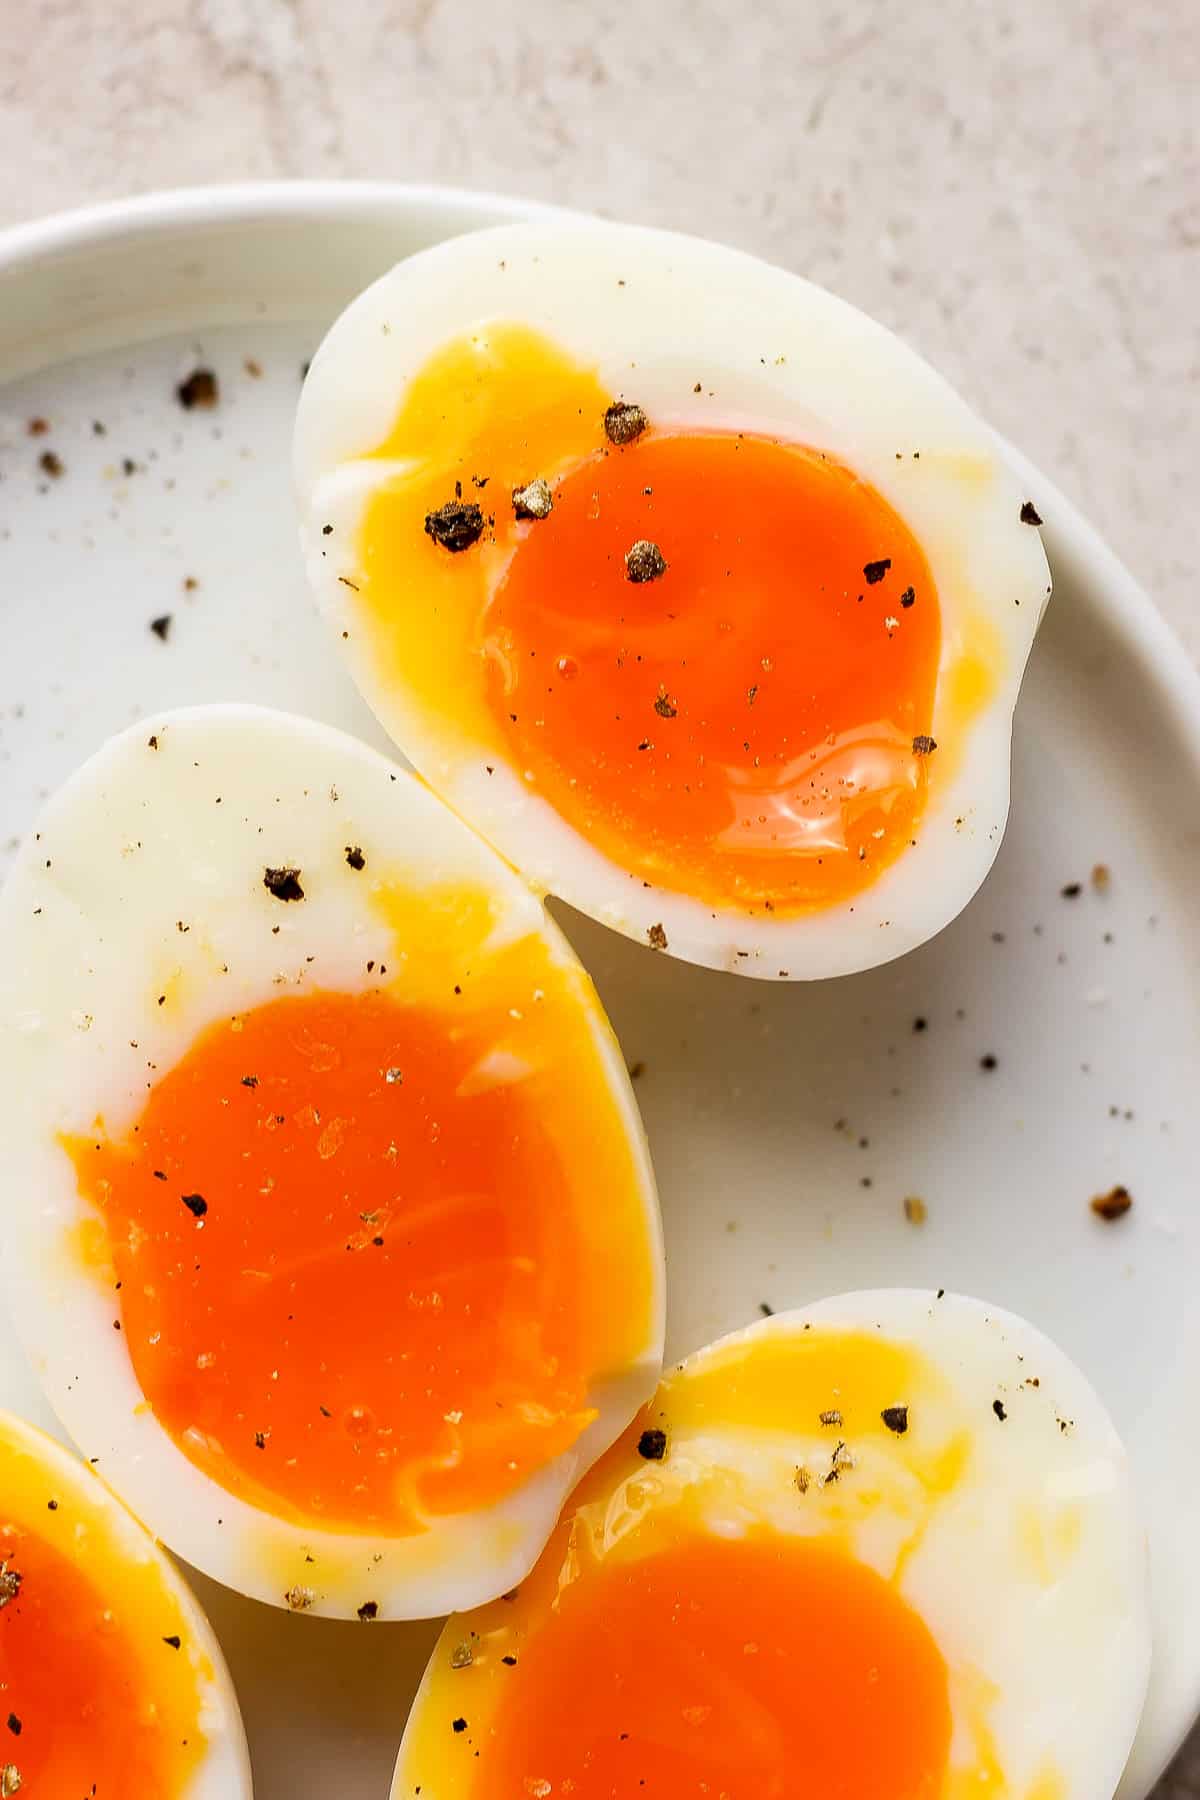 An quick and easy tutorial on how to soft boil eggs.